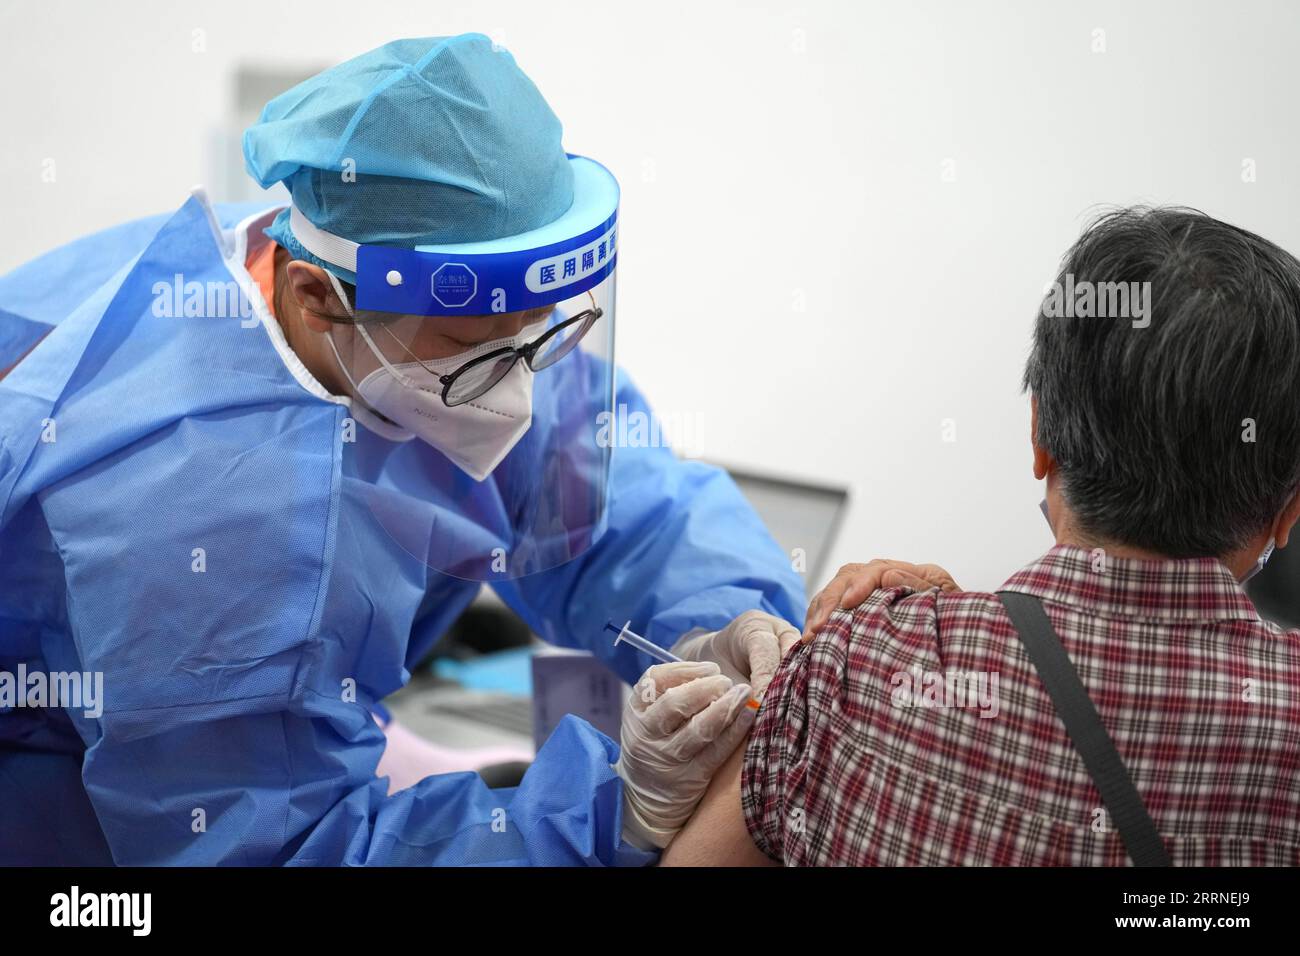 230107 -- BEIJING, Jan. 7, 2023 -- A medical worker injects a booster shot of COVID-19 vaccine for a resident at Aoyuncun Subdistrict in Chaoyang District, Beijing, capital of China, July 13, 2022.  Xinhua Headlines: Six fallacies and truths about China s epidemic control JuxHuanzong PUBLICATIONxNOTxINxCHN Stock Photo